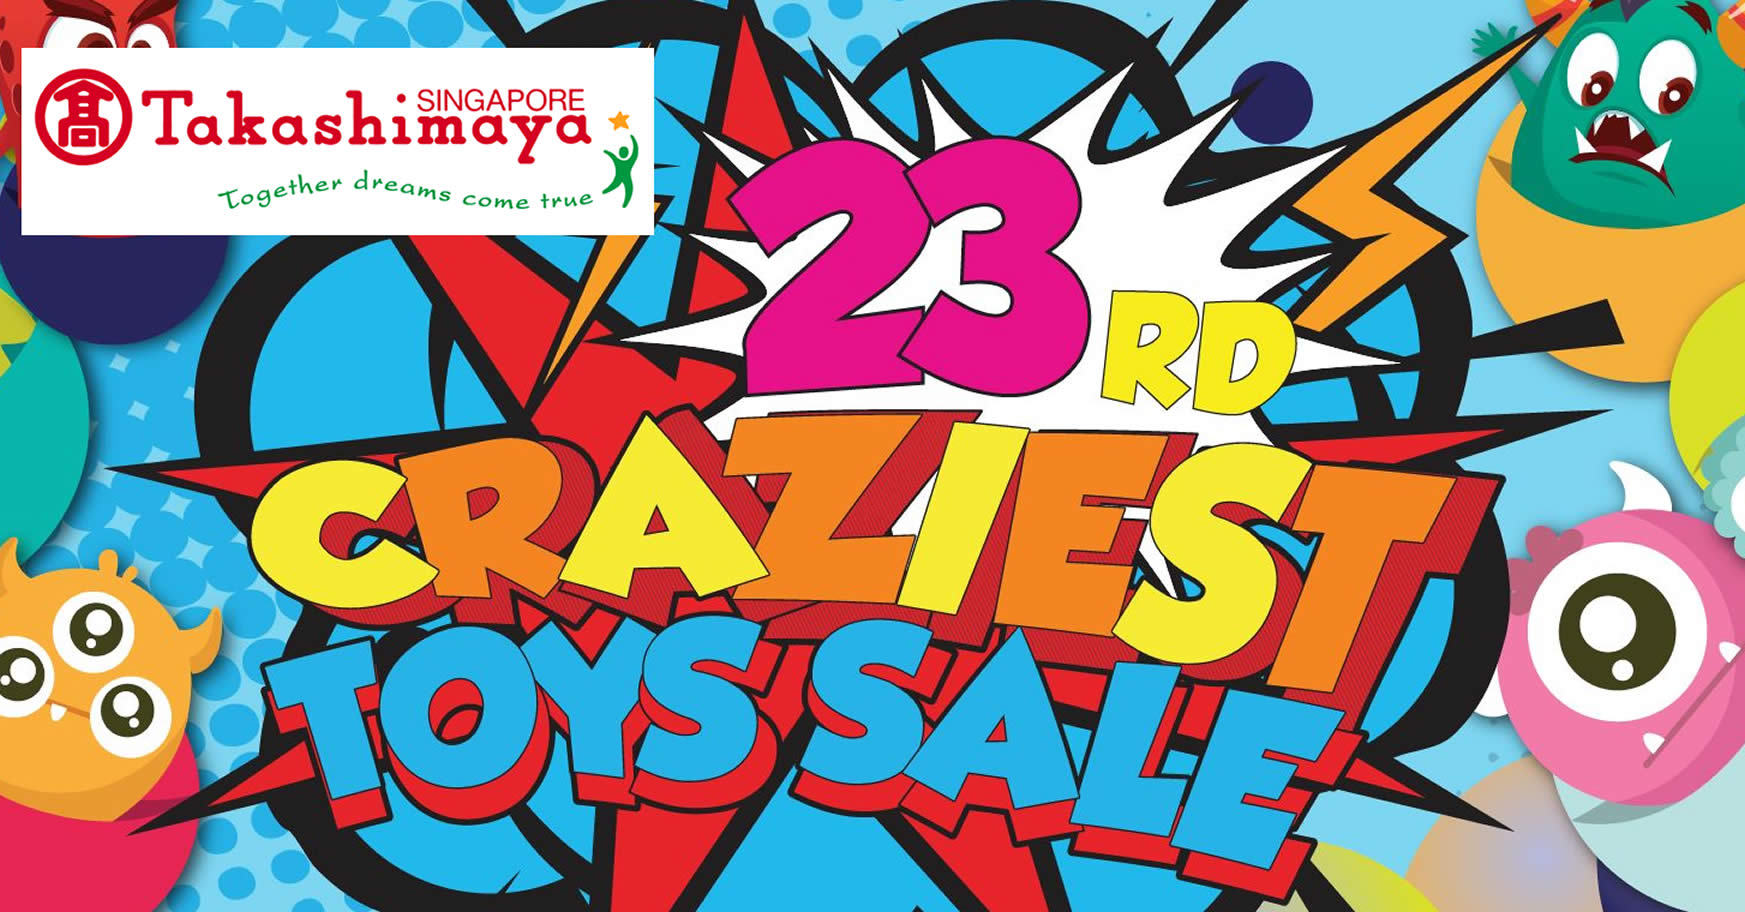 Featured image for Takashimaya Craziest Toys Sale from 24 July - 4 August 2019